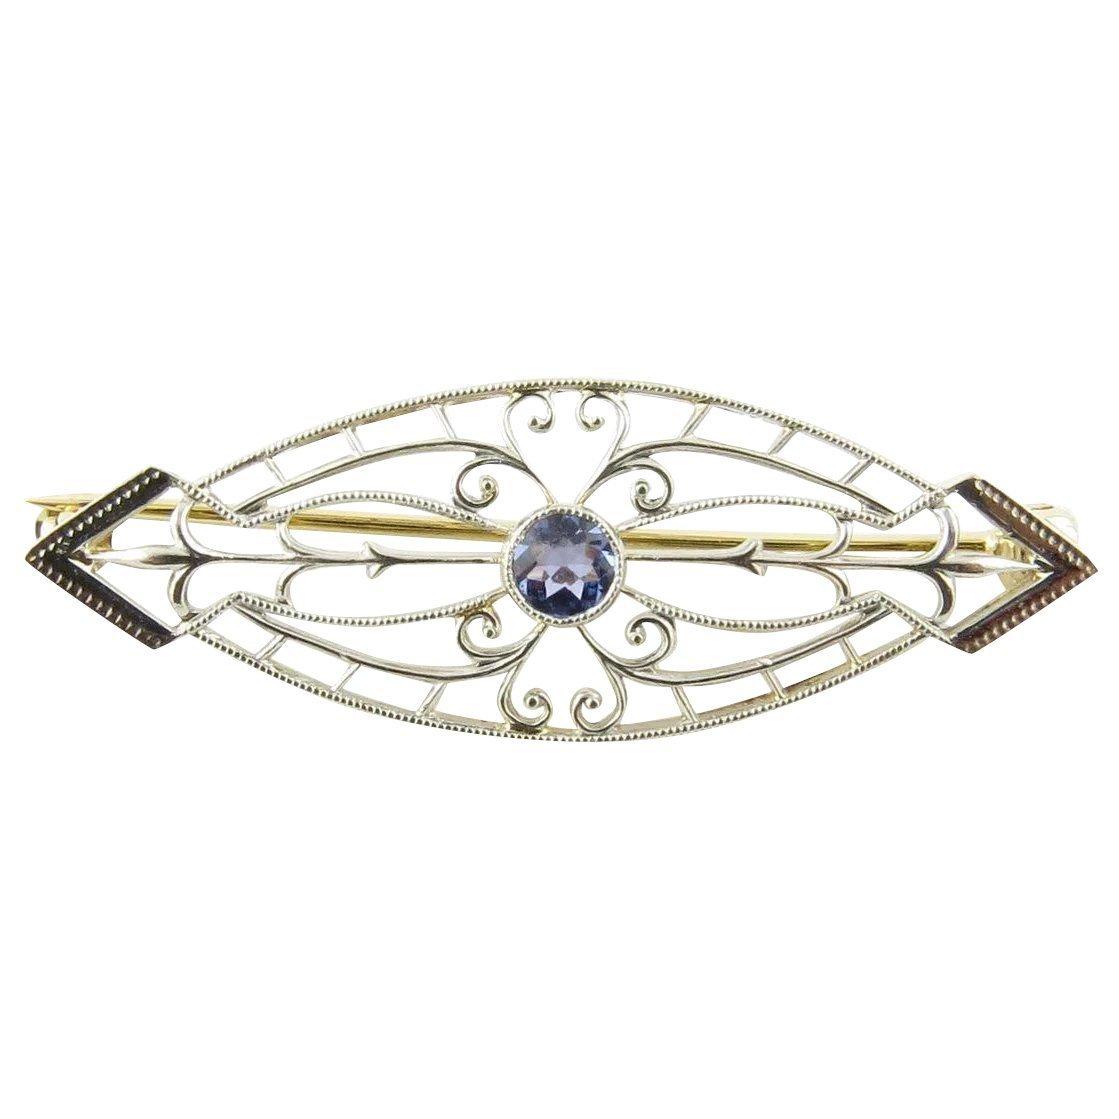 14 Karat White and Yellow Gold and Sapphire Brooch or Pin 2